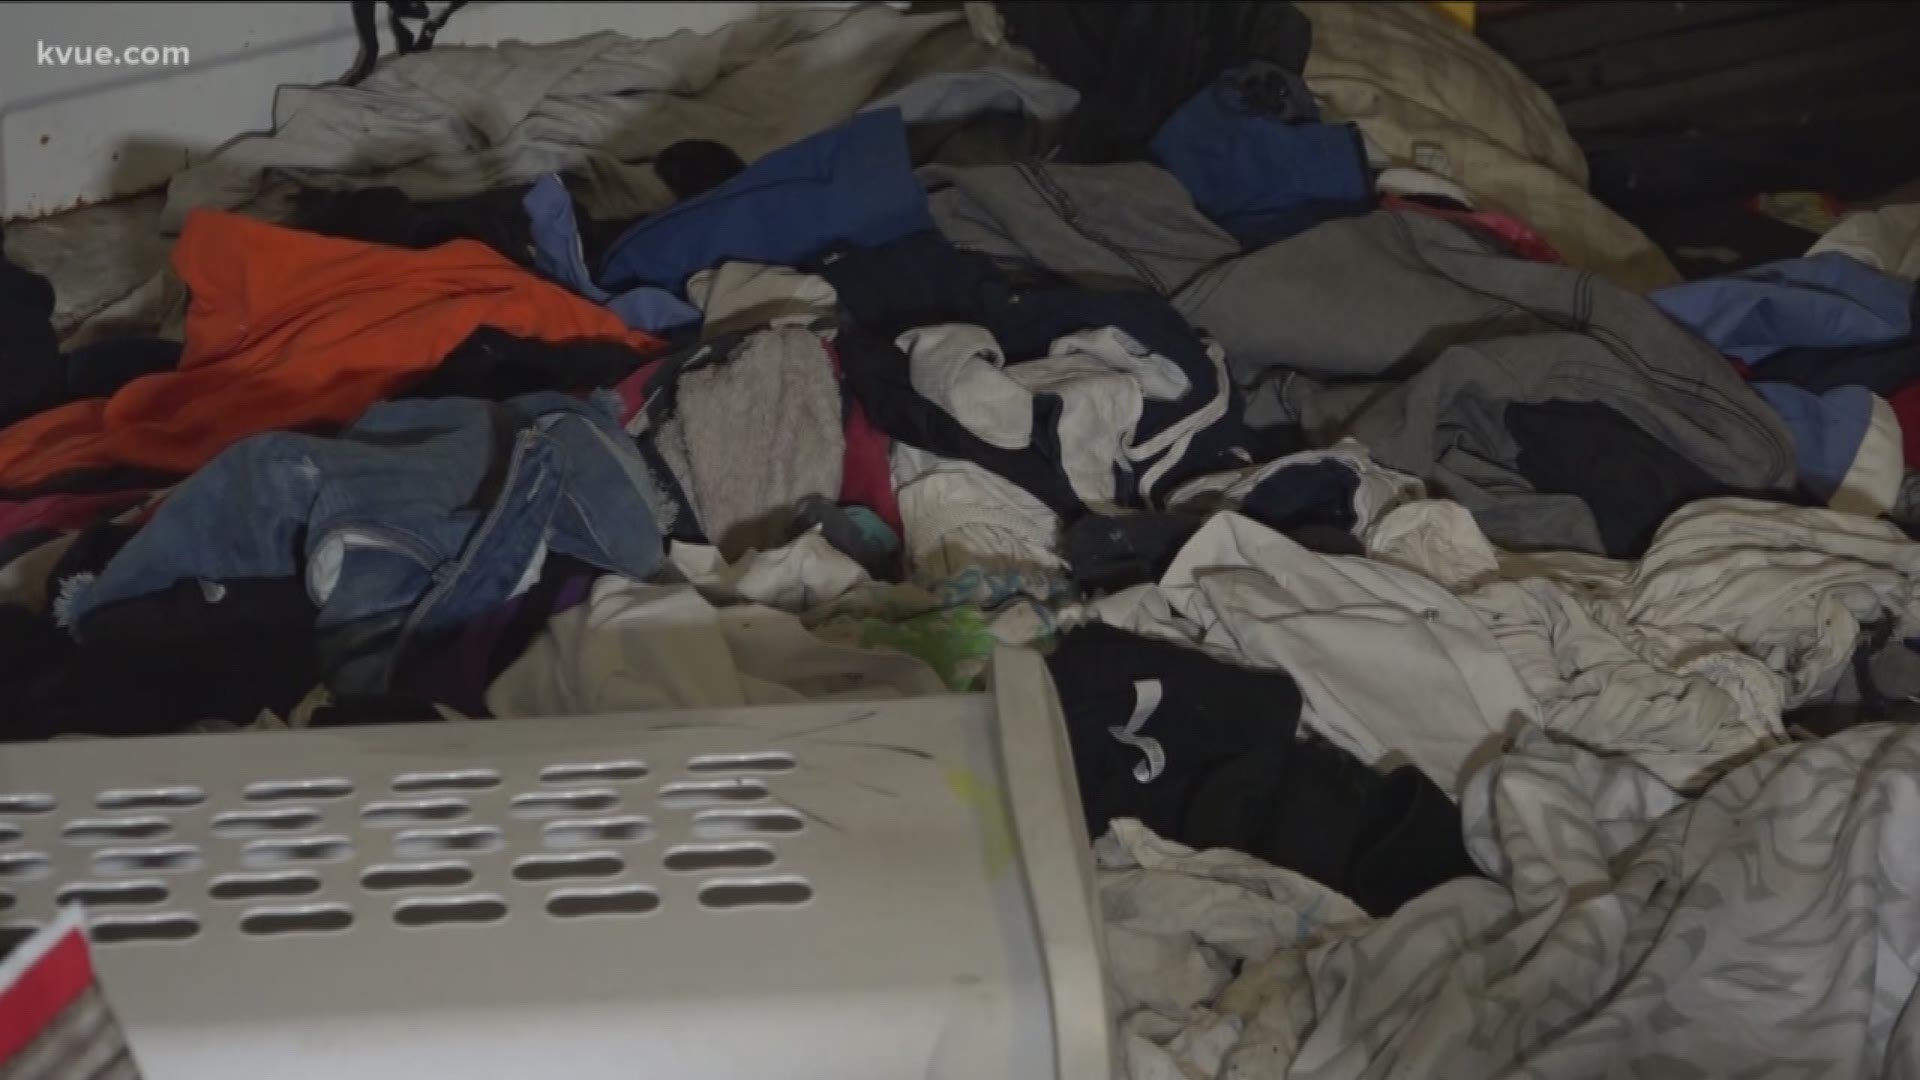 Businesses help family dealing with hoarding